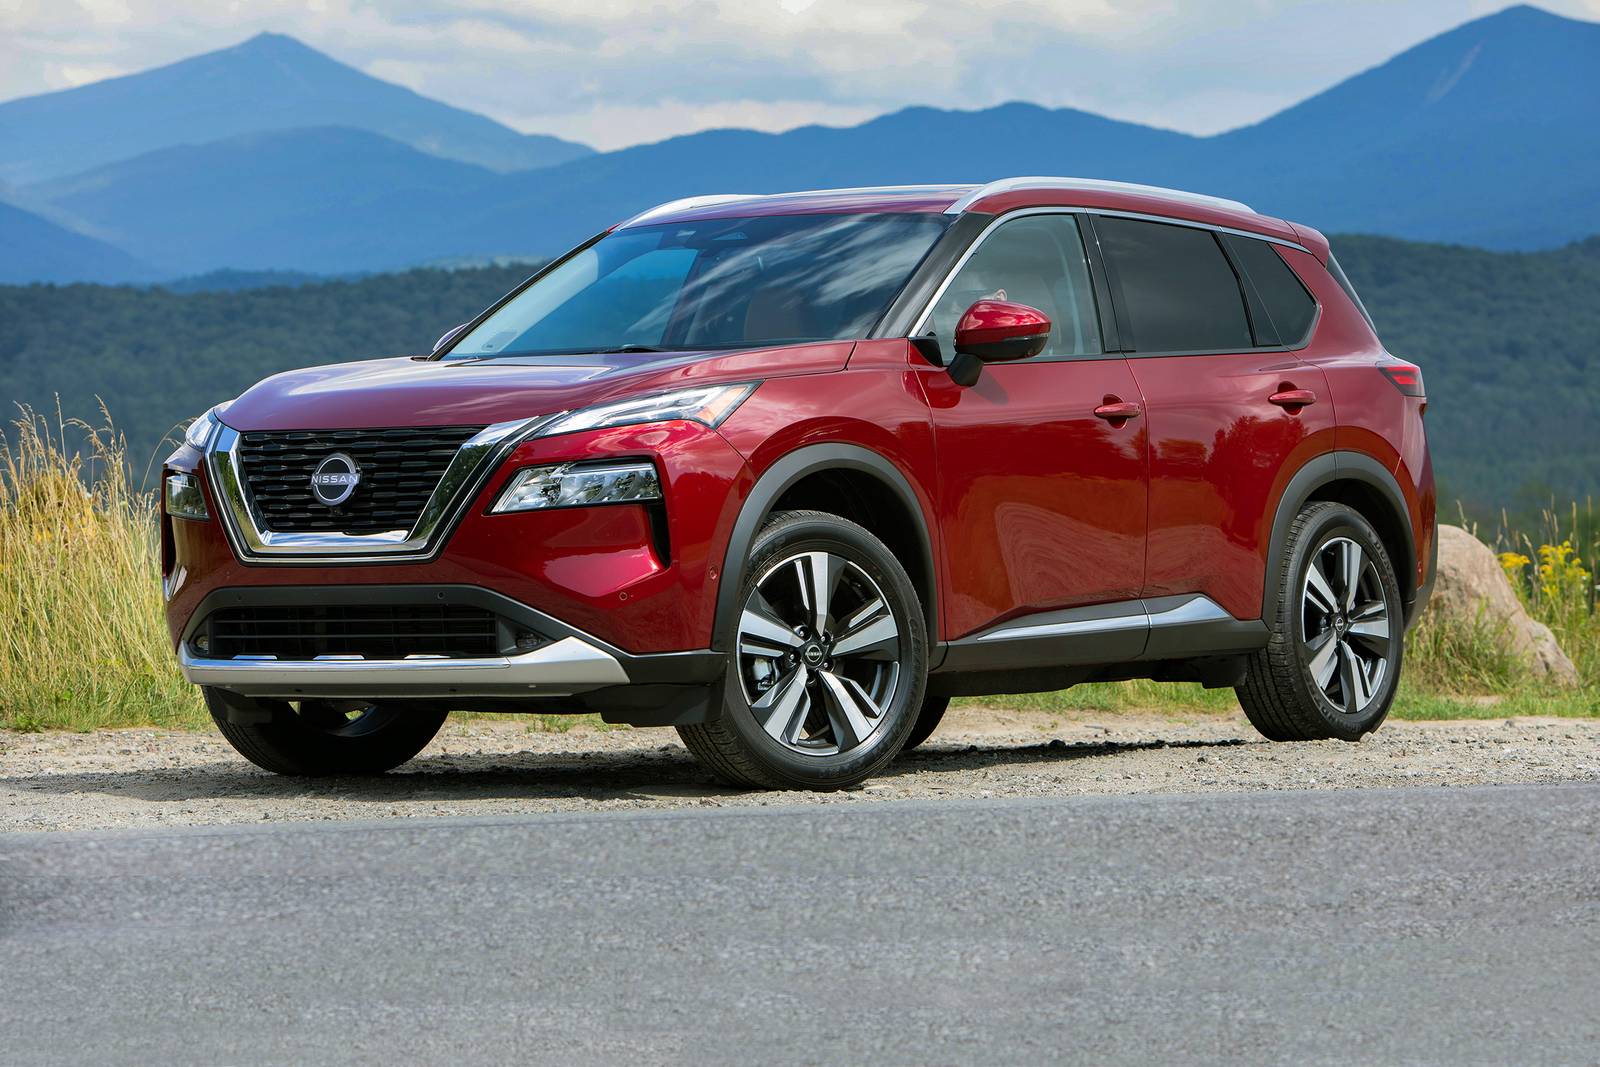 How Long is a Nissan Rogue 